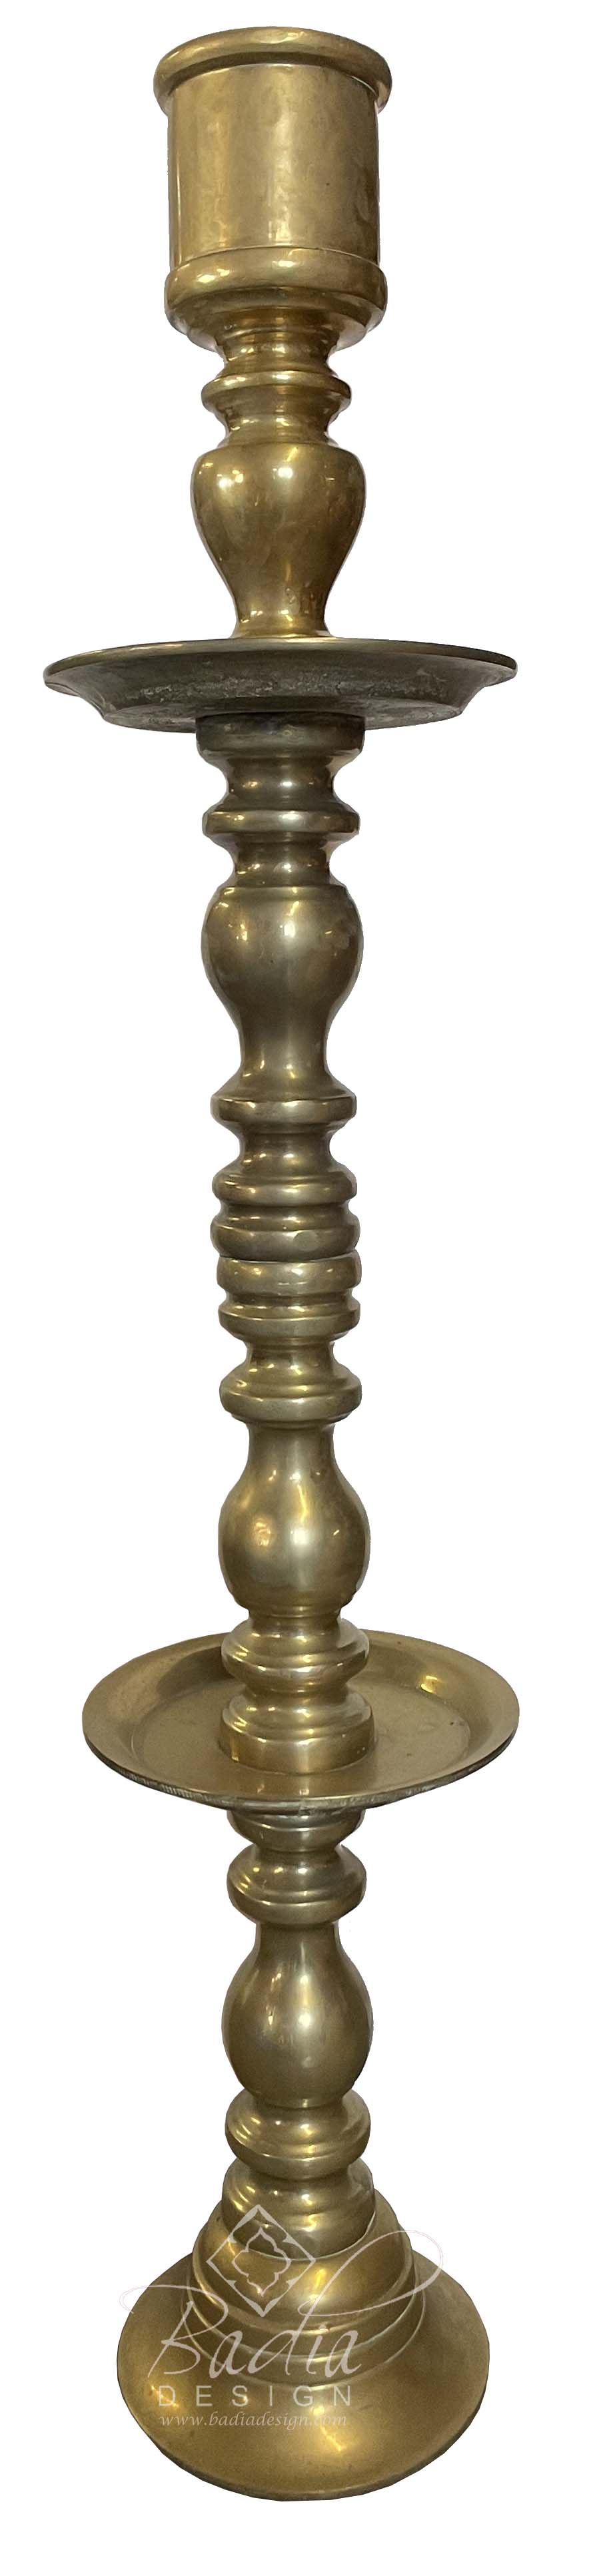 tall-moroccan-brass-candle-holder-hd263.jpg